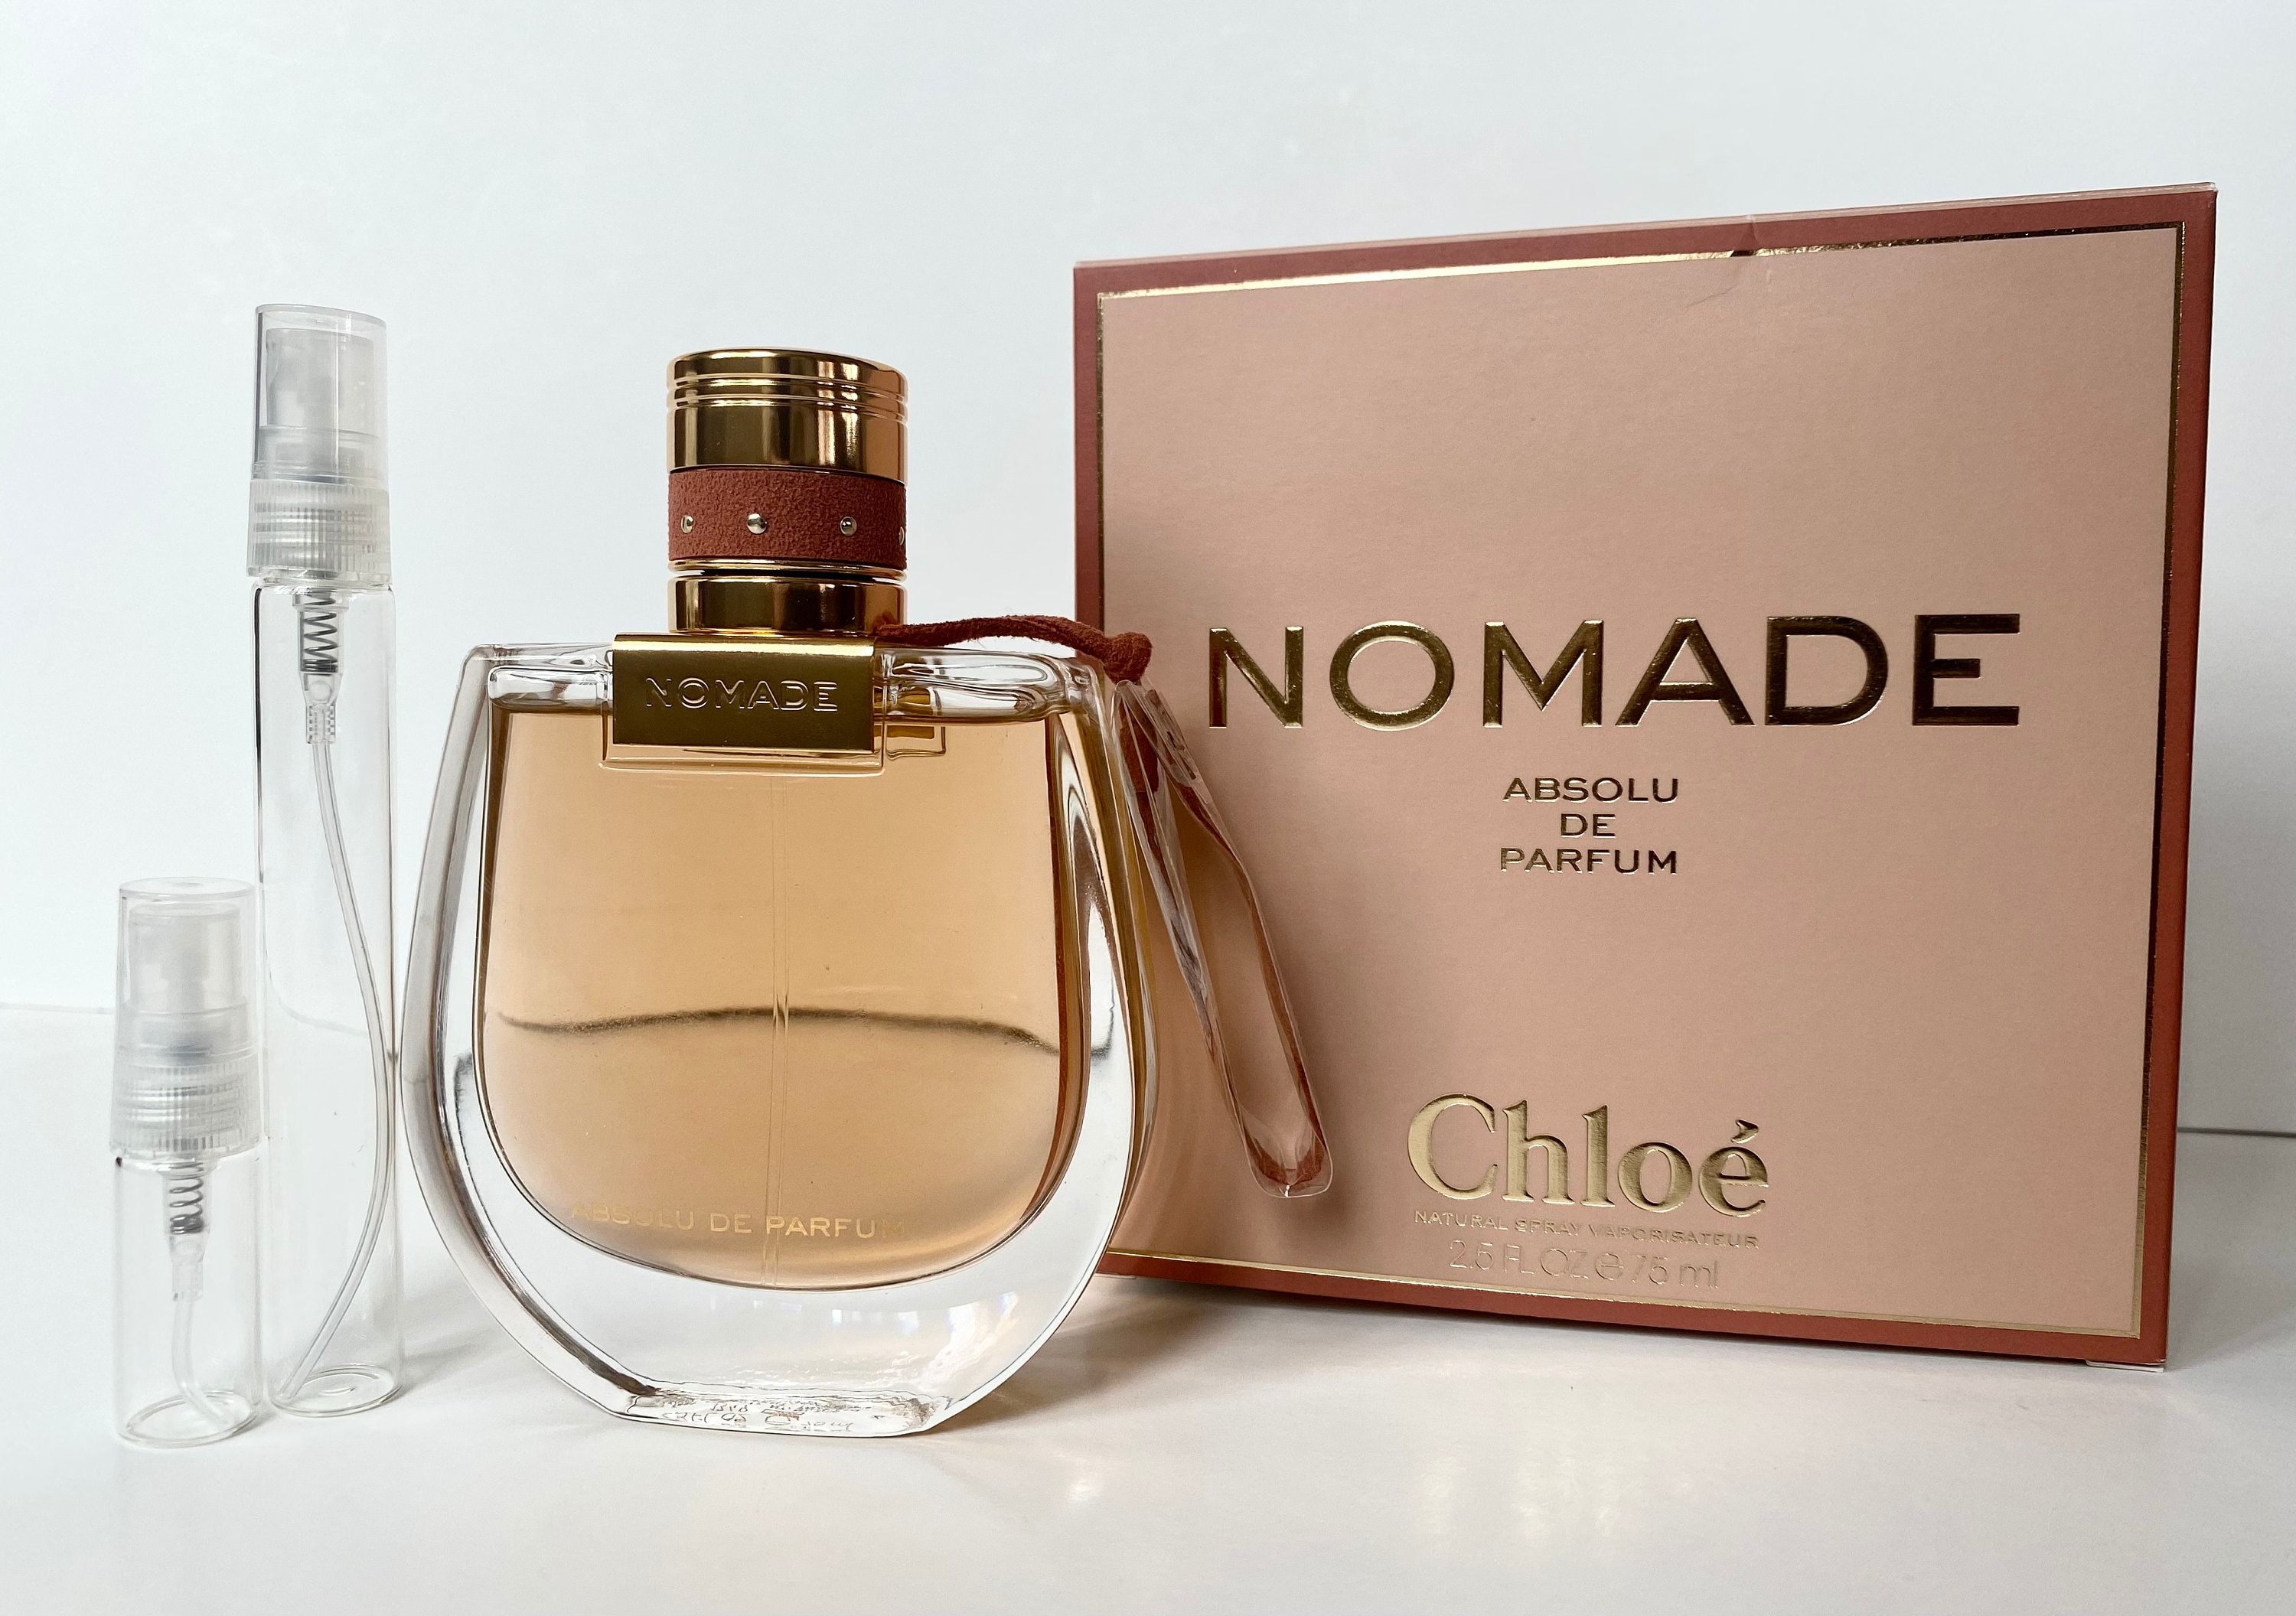 Chloe Nomade Dupe: Finding an Affordable Alternative